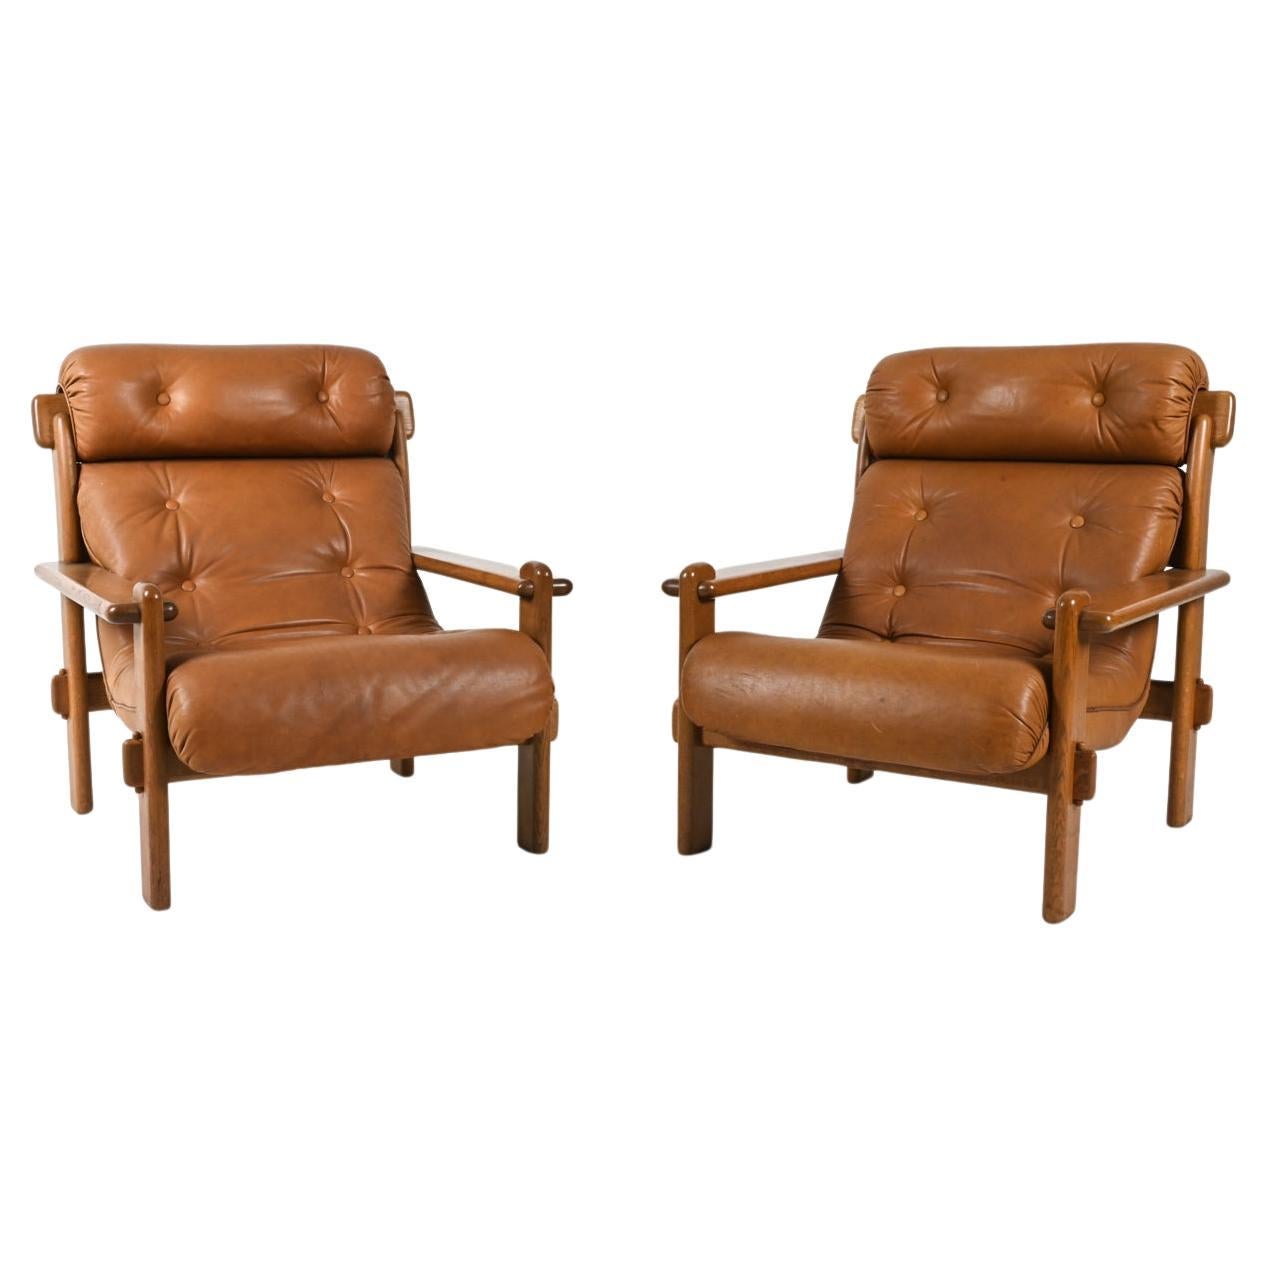 Pair of European Brutalist Armchairs in Oak & Leather, c. 1970's For Sale